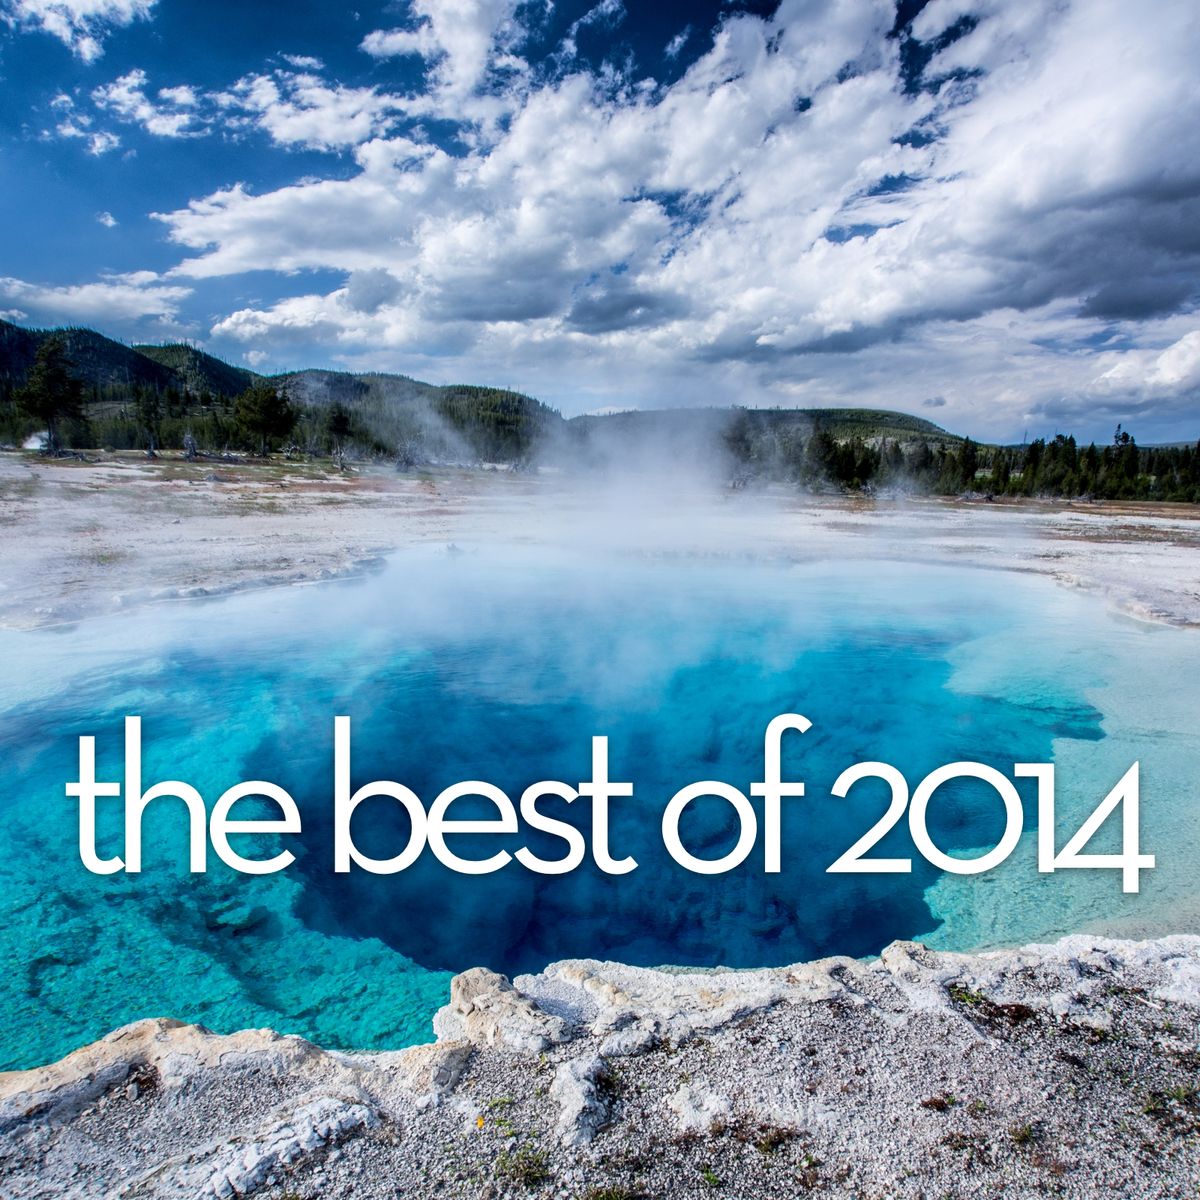 ✱ The Best of 2014